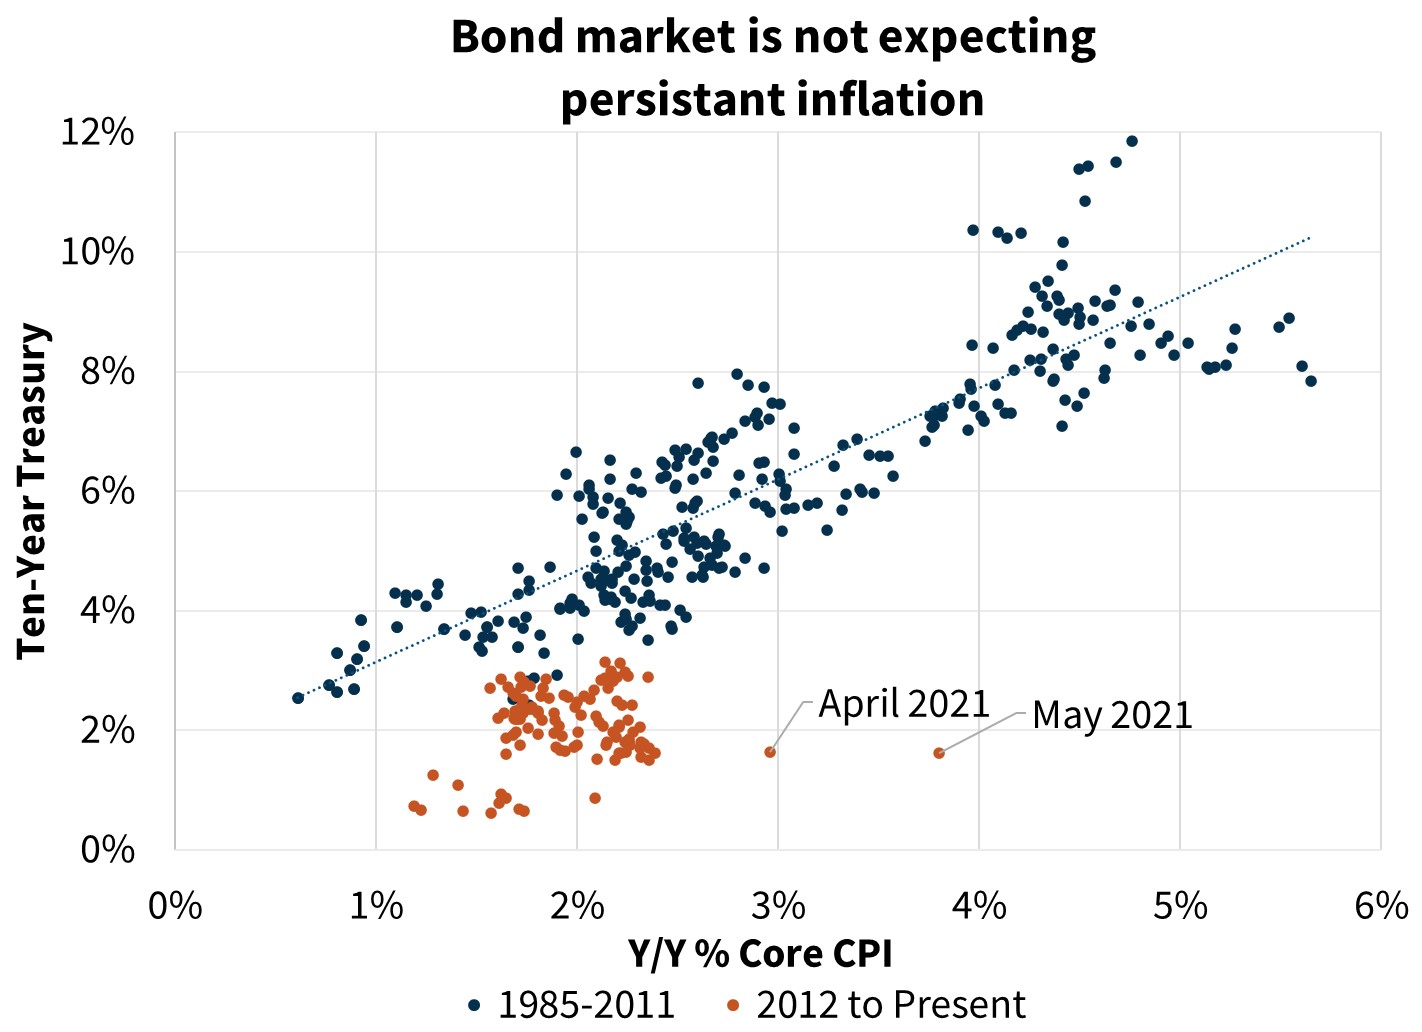  Bond market is not expecting persistent inflation 